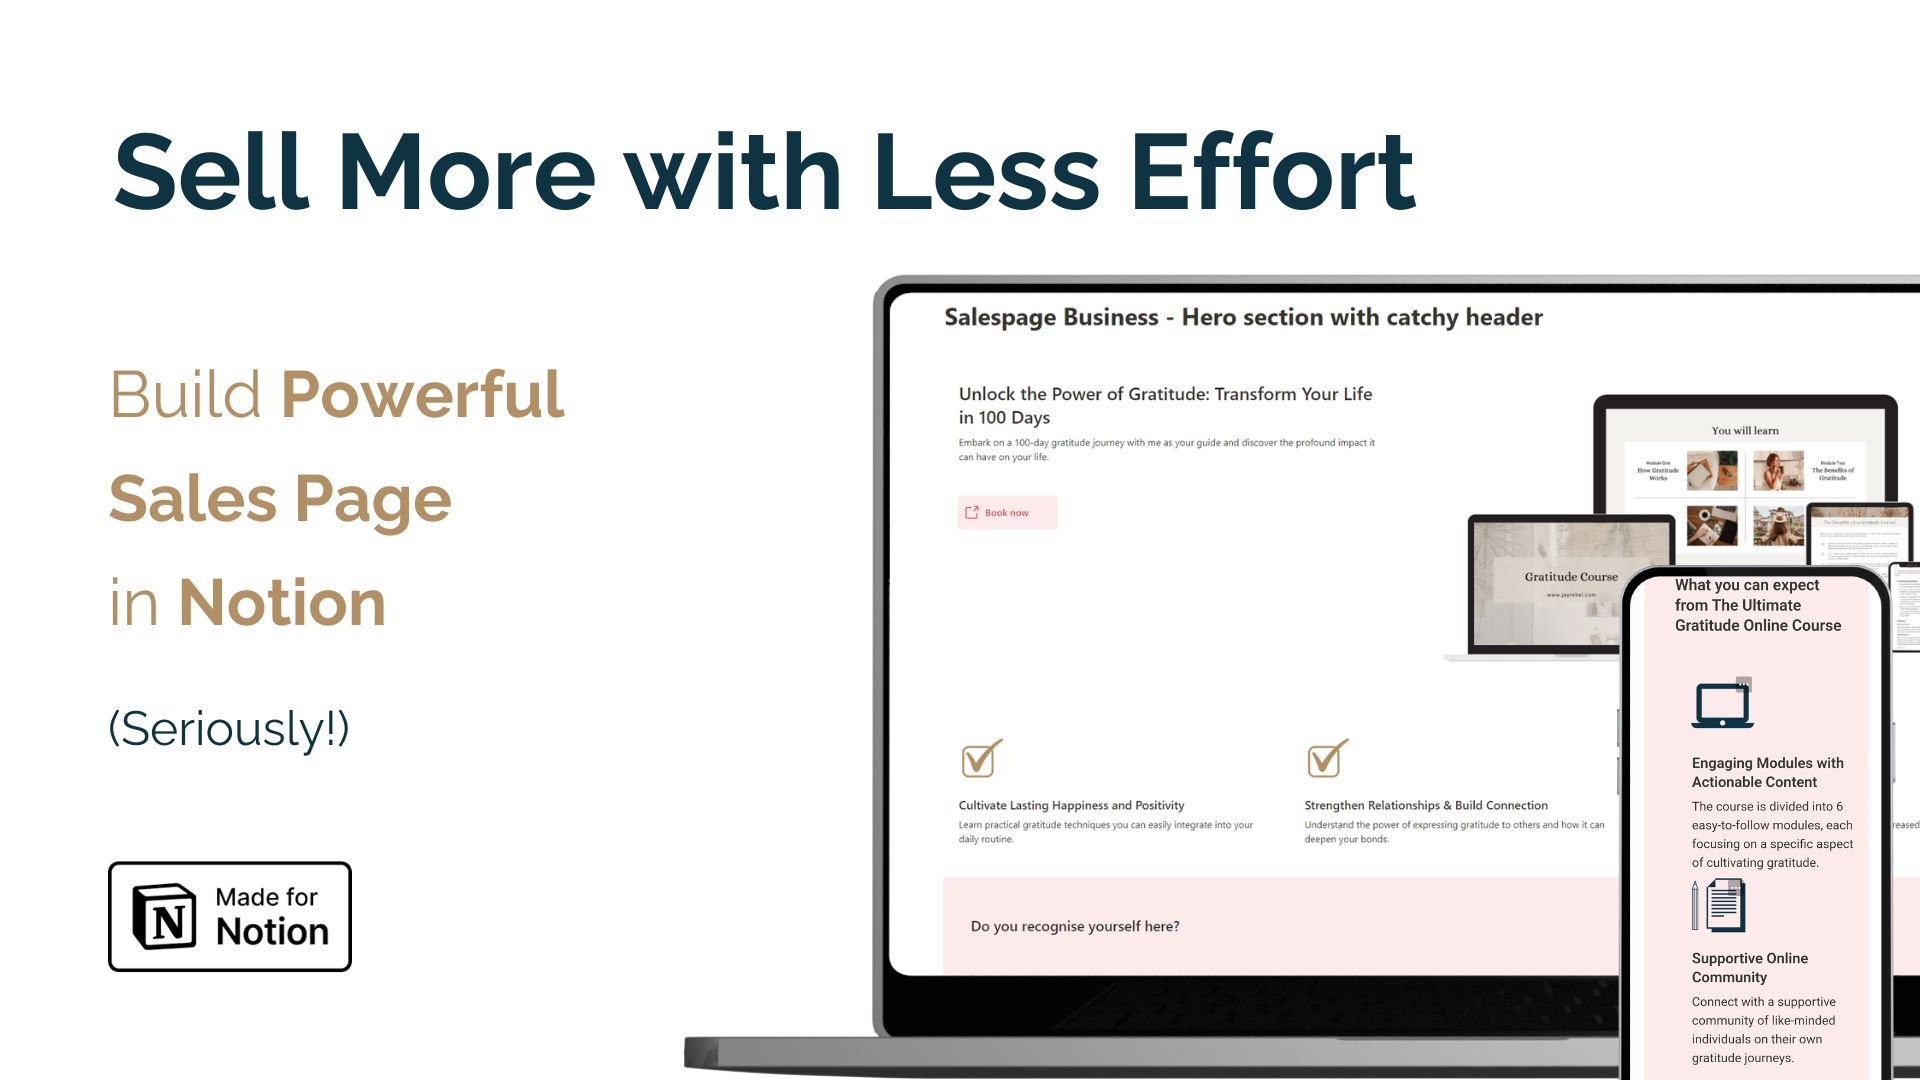 Sell More with Less Effort: Build Powerful Sales Pages Directly in Notion

Ditch your expensive tools and unlock the power of Notion for creating high-converting sales pages.

Design professional sales pages in minutes with this drag-and-drop Notion template.

No coding required.